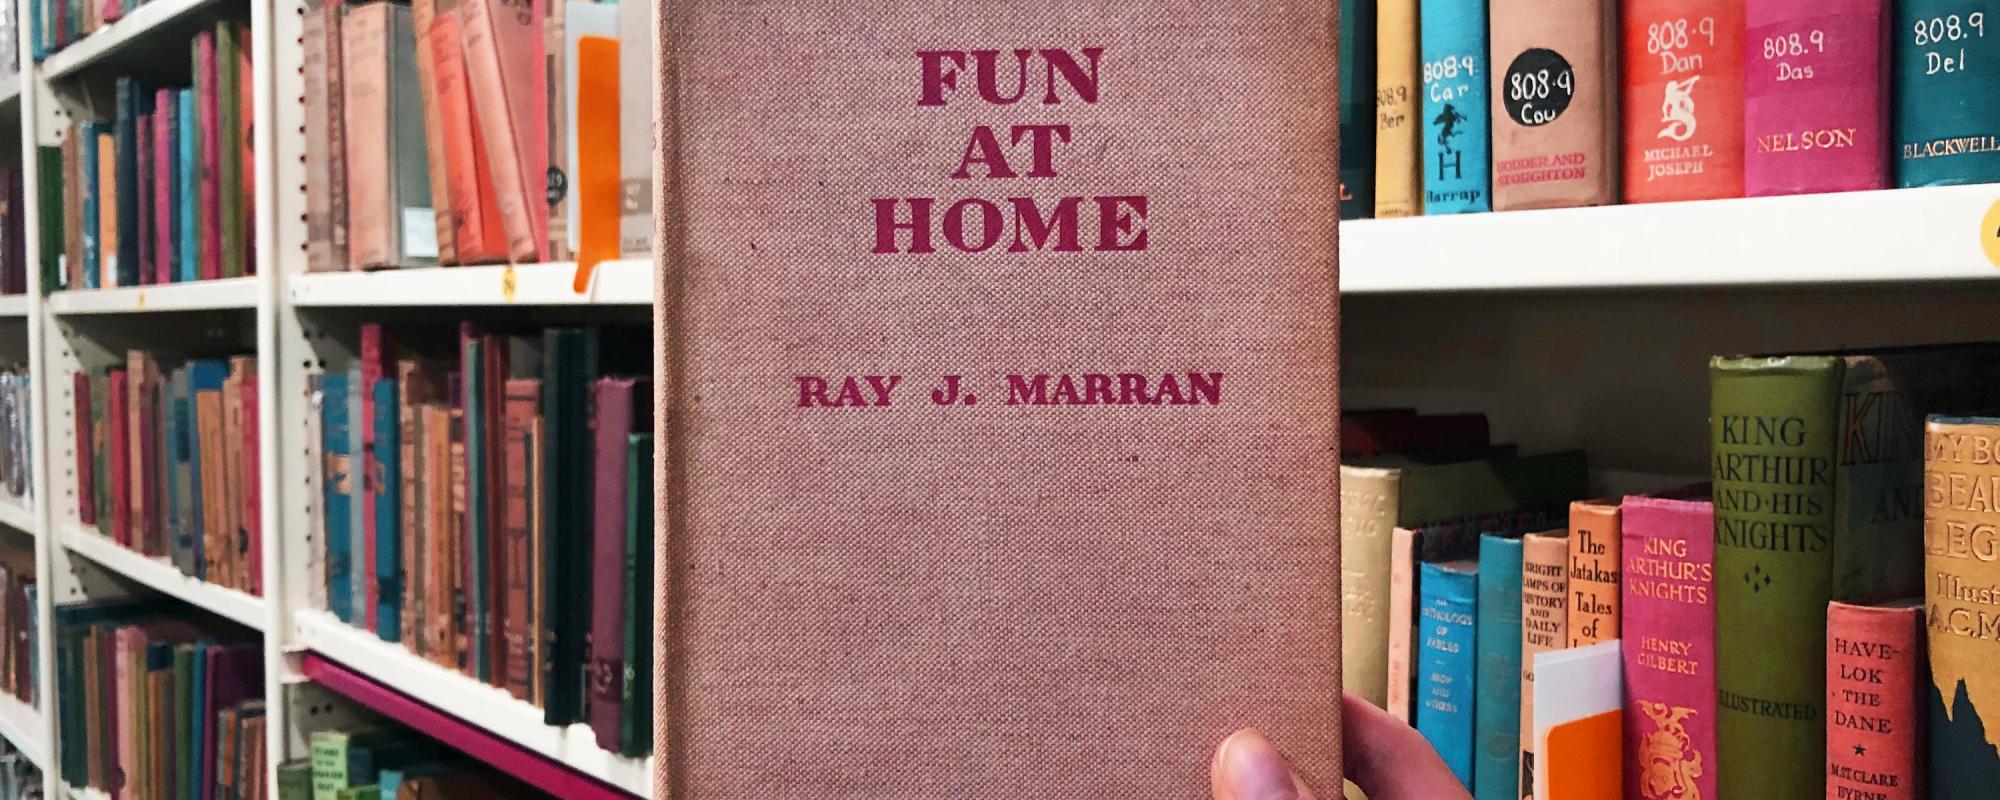 Hand holding up book titled 'Fun at Home' with book shelves in the background